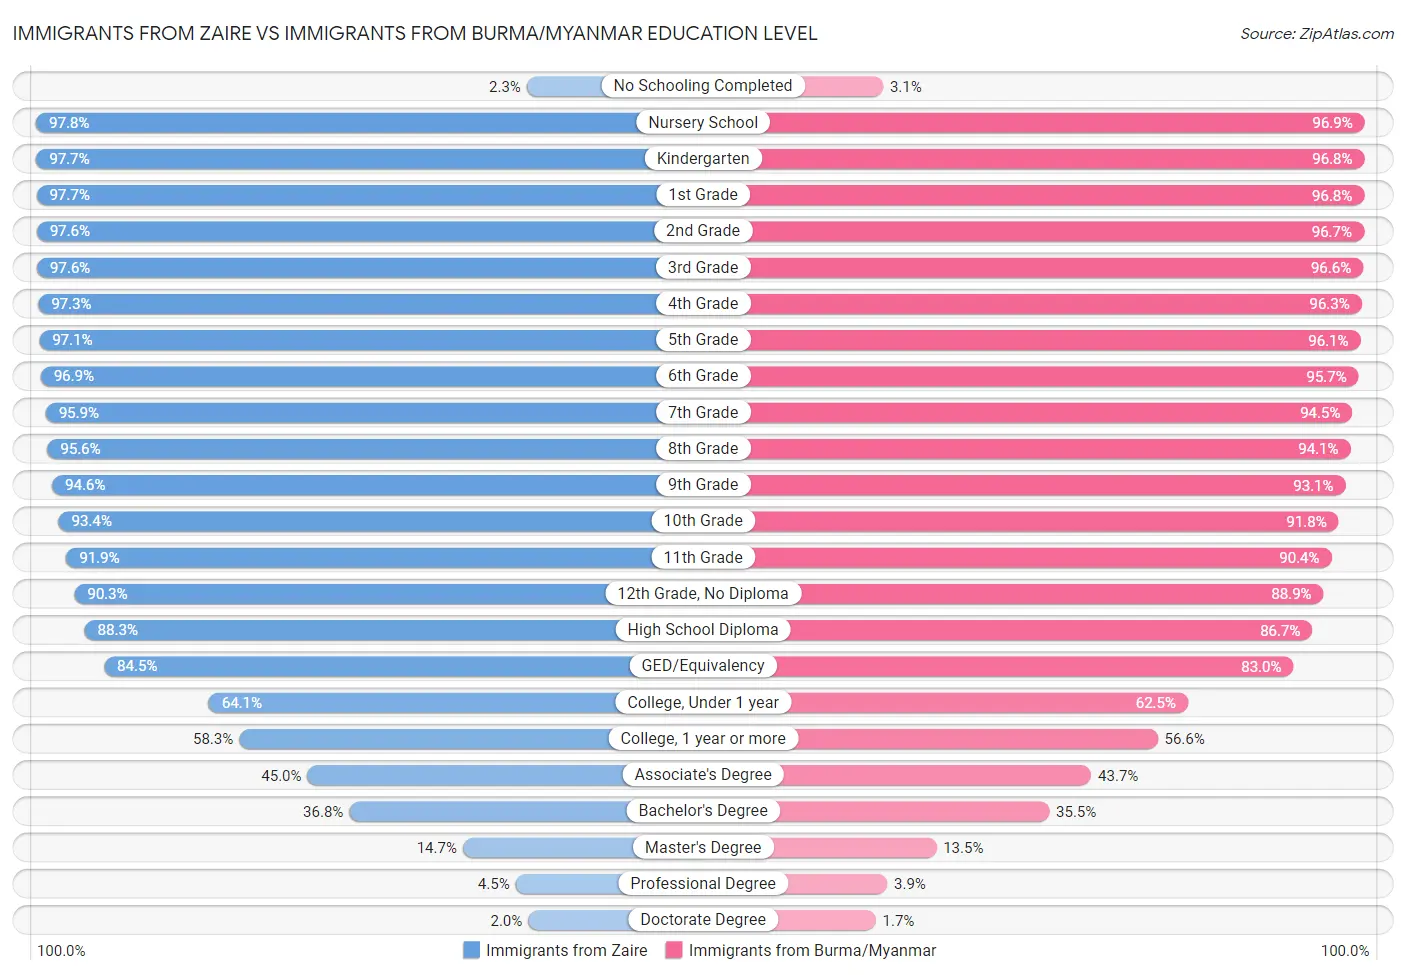 Immigrants from Zaire vs Immigrants from Burma/Myanmar Education Level